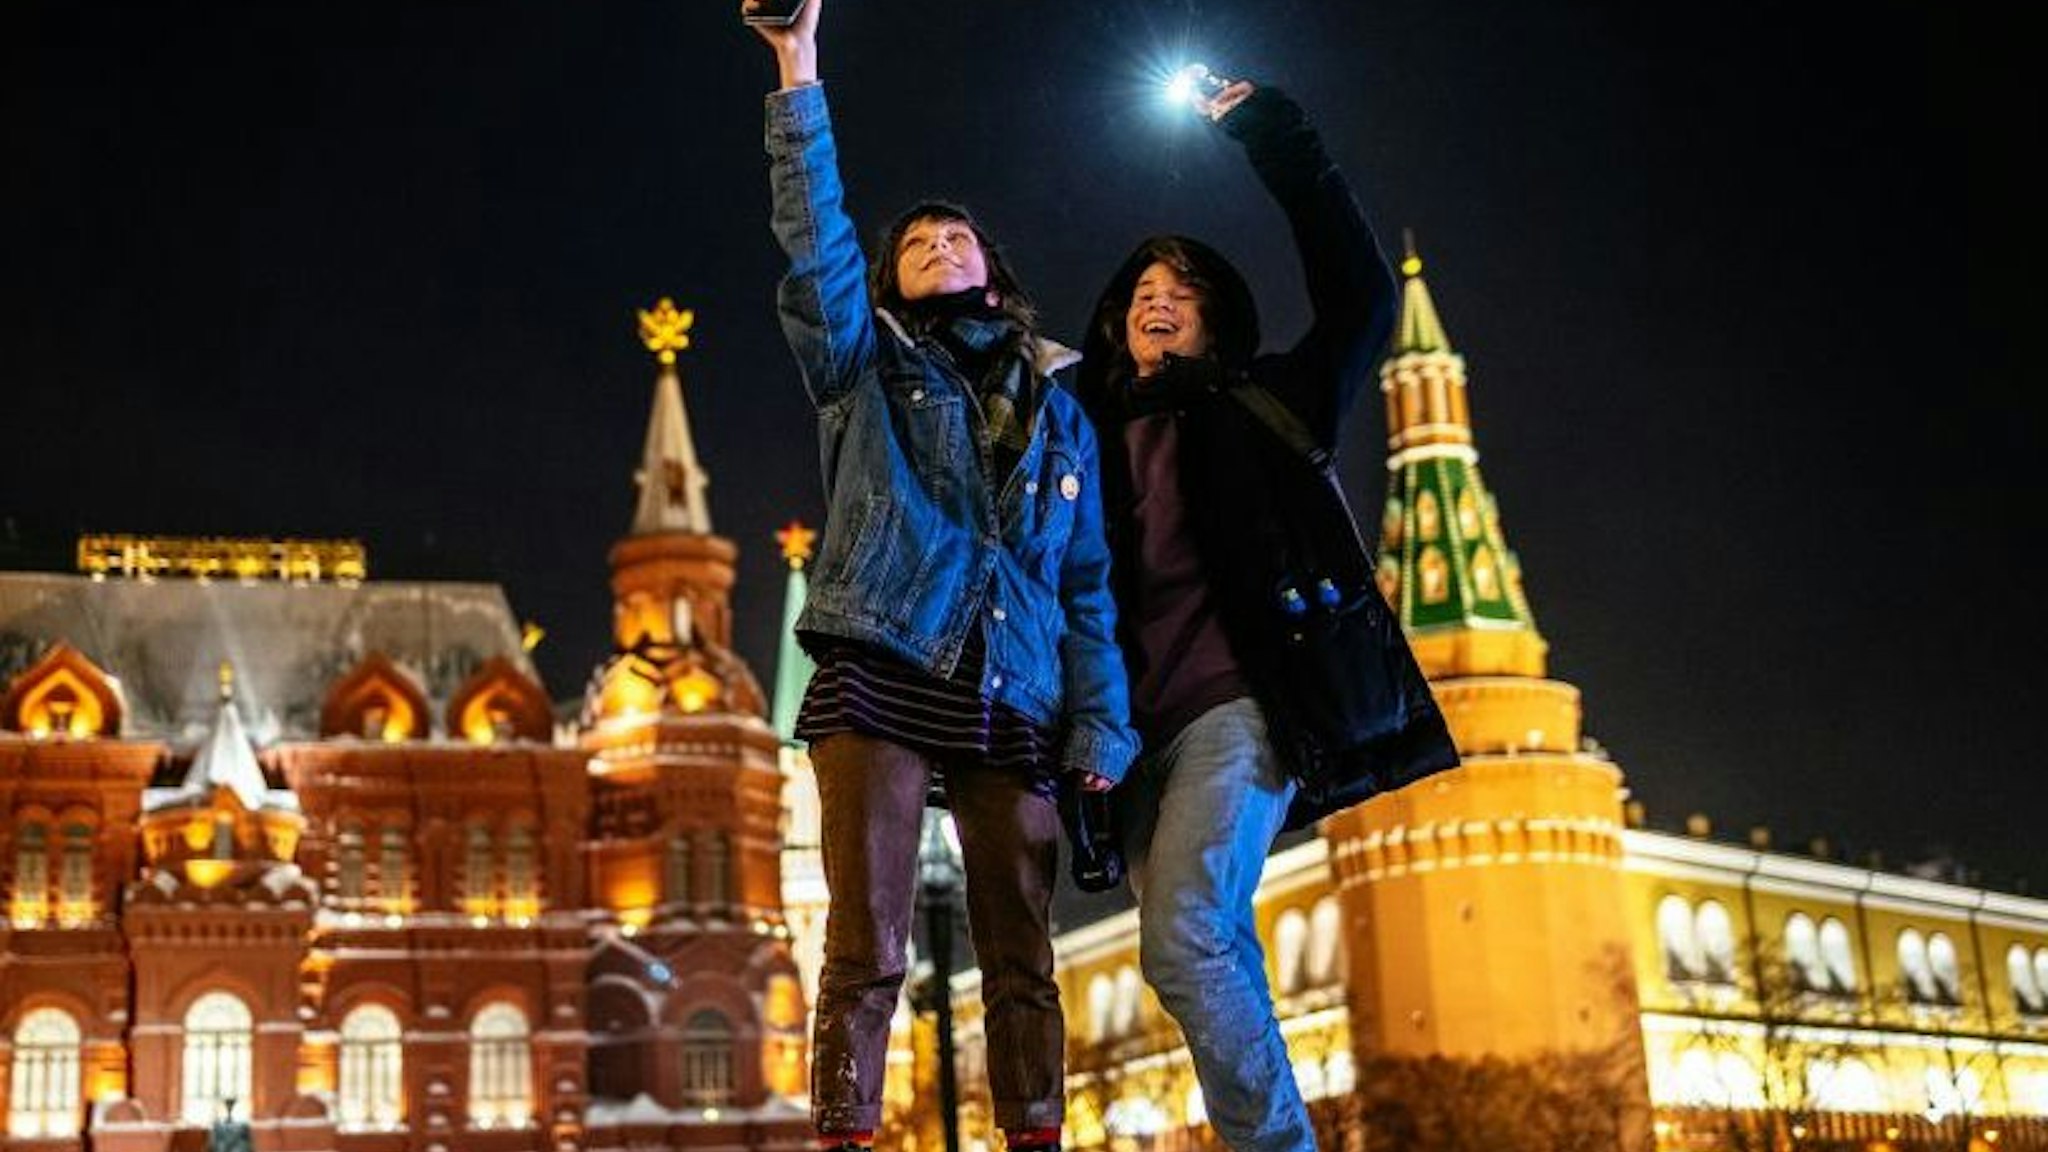 Young people turn on the flashlights of their mobile phones in support of jailed opposition politician Alexei Navalny near Red Square in Moscow on February 14, 2021. - The gathering came after authorities sentenced Navalny last week to nearly three years in prison and unleashed a crackdown on his supporters. Navalny's arrest on arrival back in Russia last month sparked nationwide protests that saw more than 10,000 people detained and led to allegations of police abuse. (Photo by Dimitar DILKOFF / AFP) (Photo by DIMITAR DILKOFF/AFP via Getty Images)